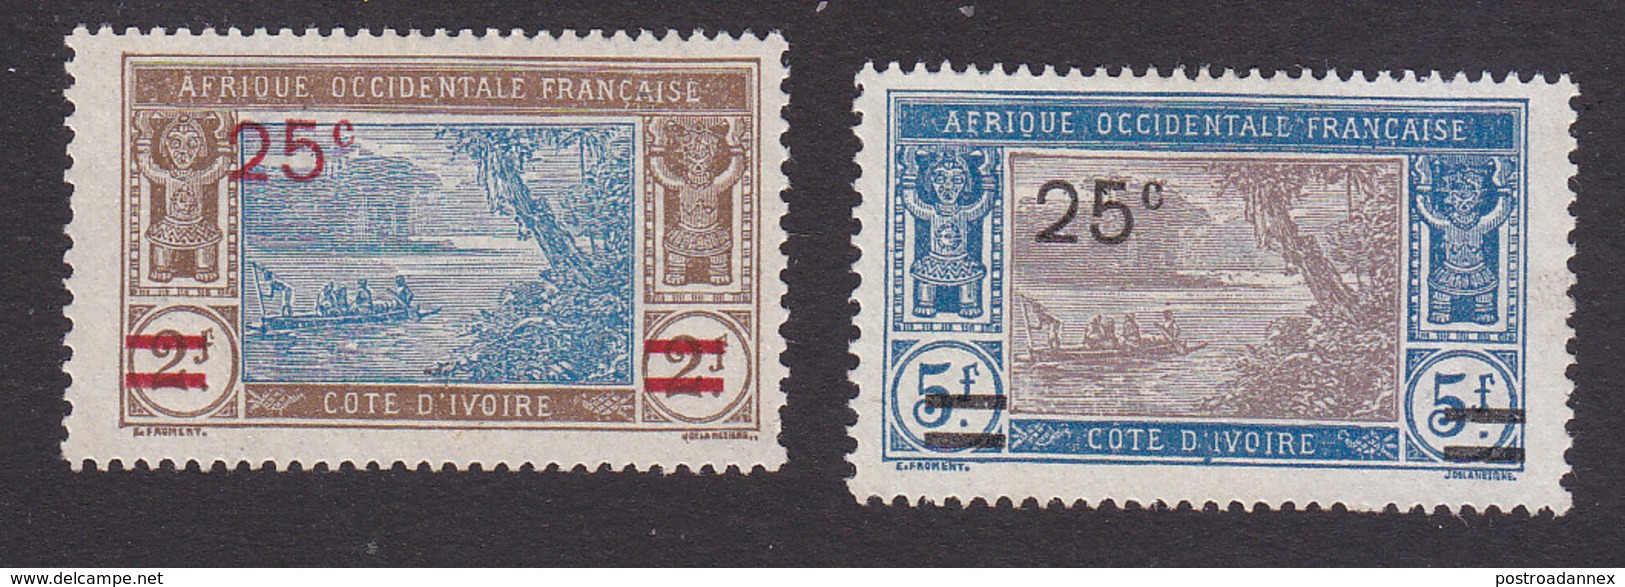 Ivory Coast, Scott #84-85, Mint No Gum, River Scene Surcharged, Issued 1924 - Unused Stamps